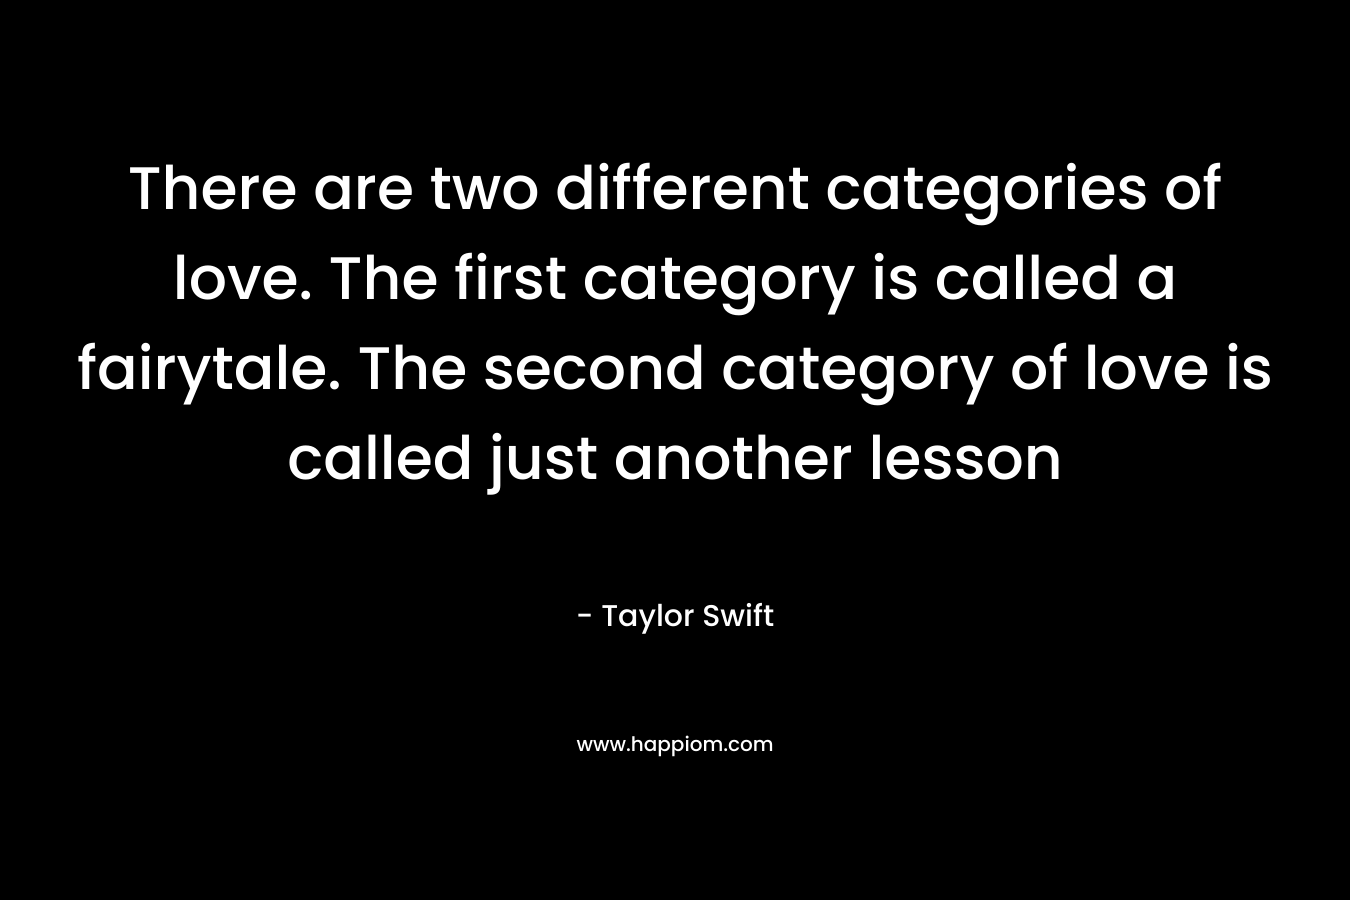 There are two different categories of love. The first category is called a fairytale. The second category of love is called just another lesson